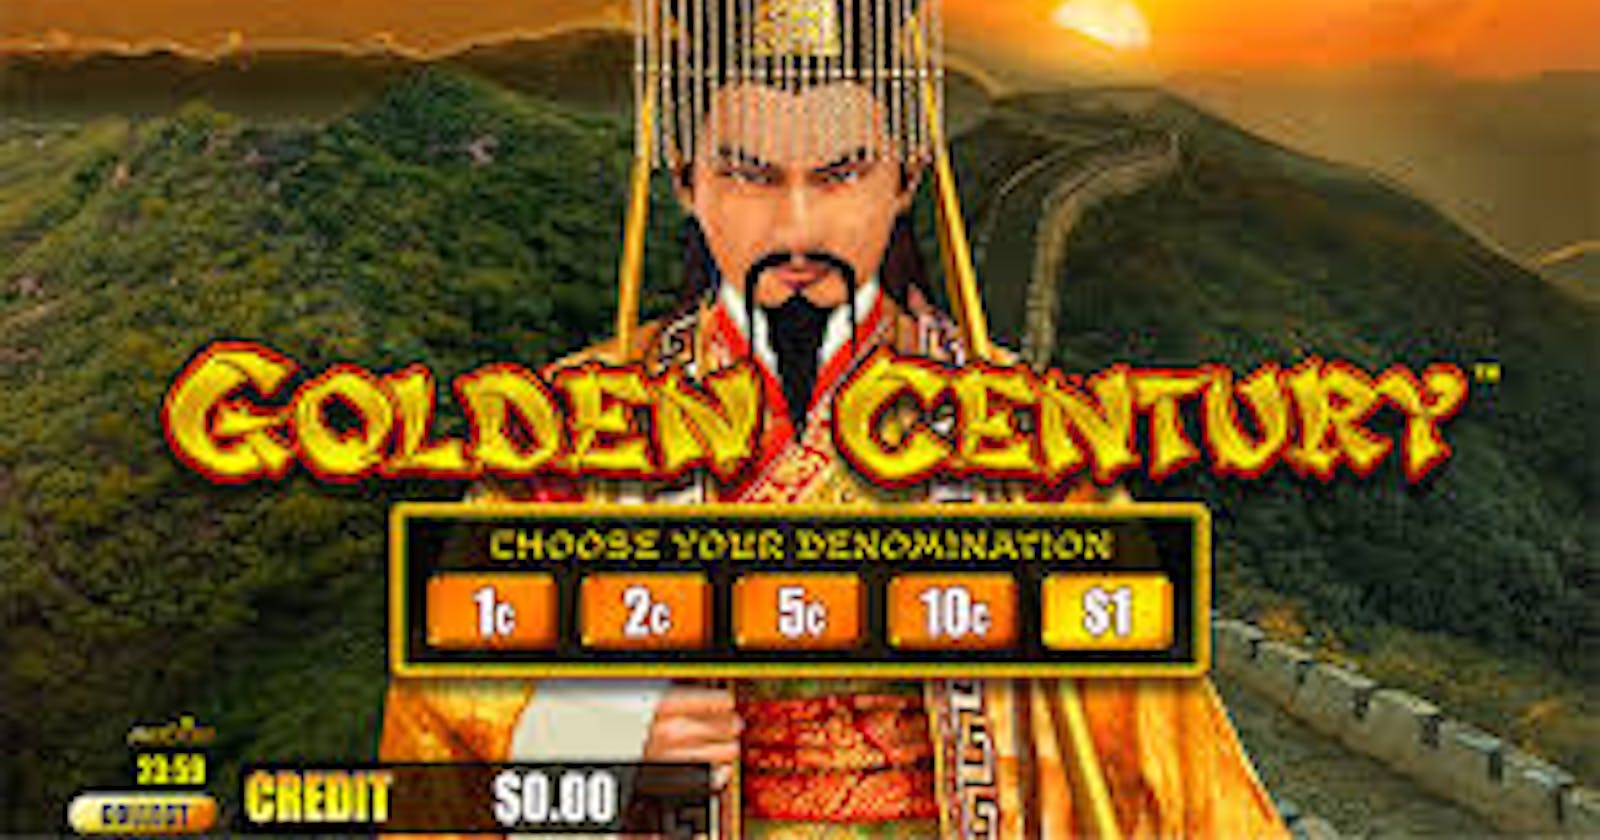 Golden Century Slot Machine: A Golden Opportunity for Massive Payouts